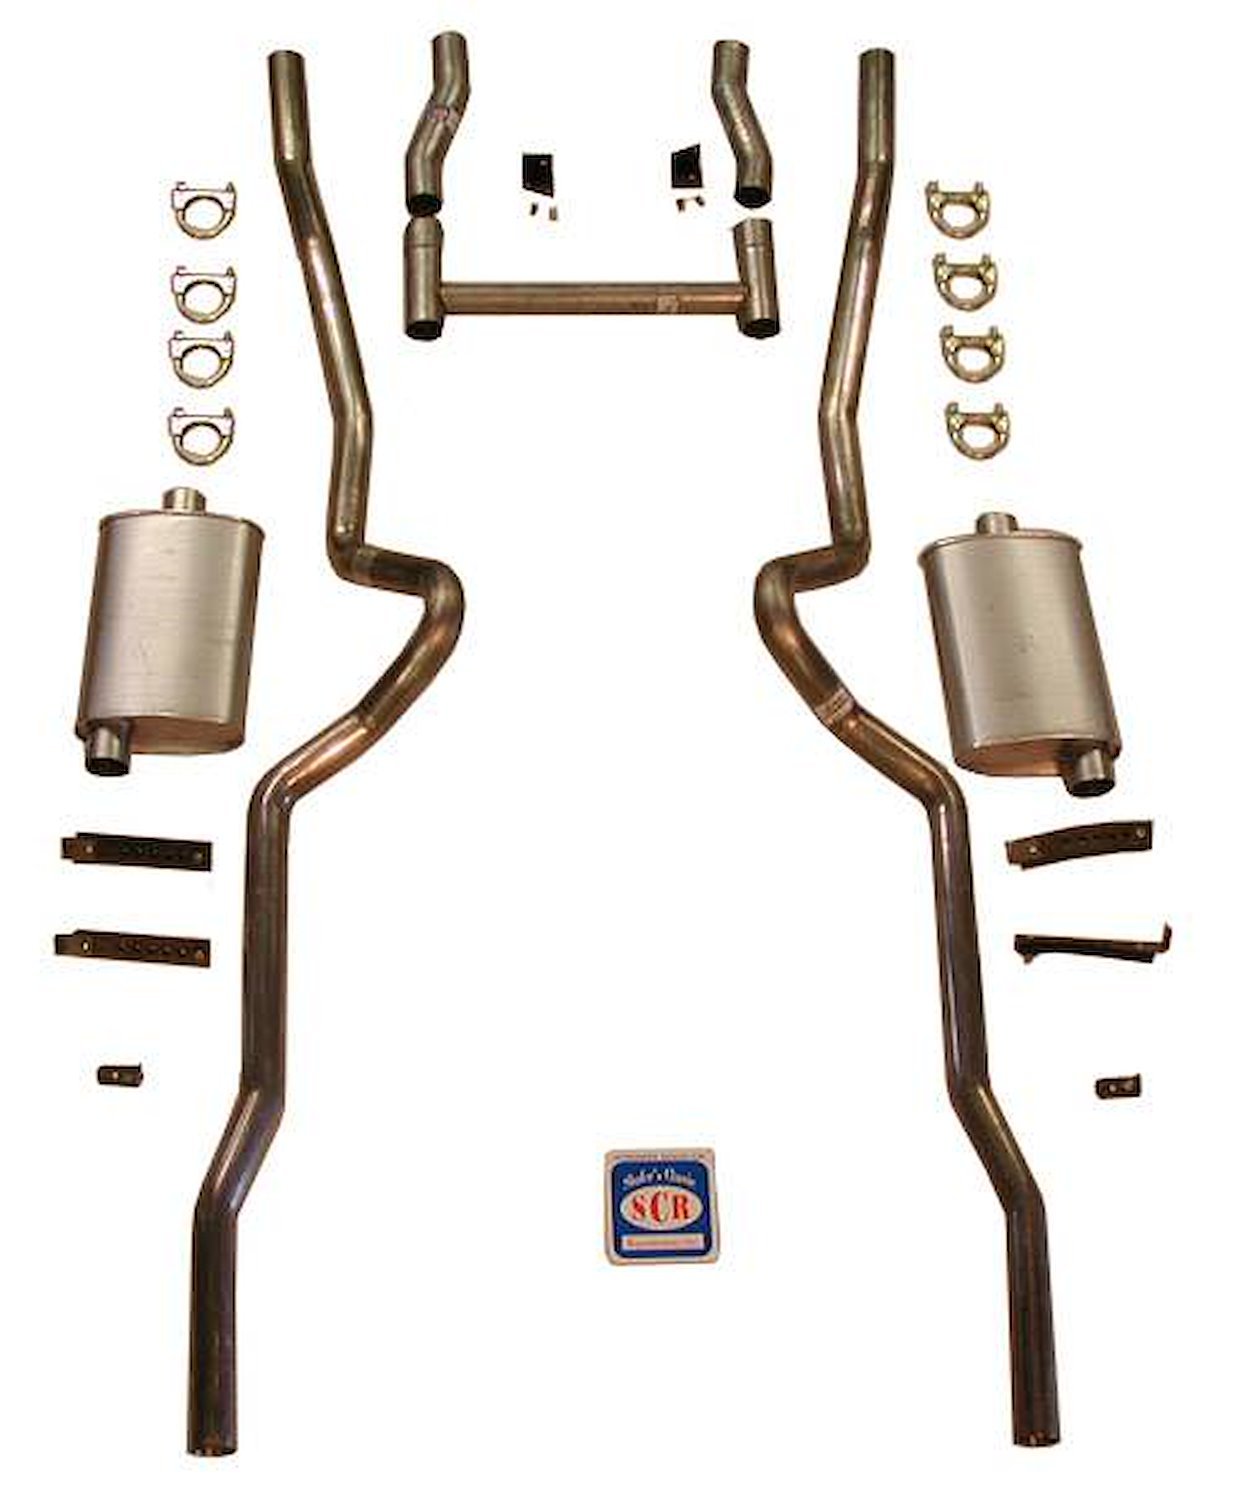 63038S 1955-1957 Chevrolet Full-Size 2-1/2 in. Dual Turbo Exhaust System, 304 Stainless Steel